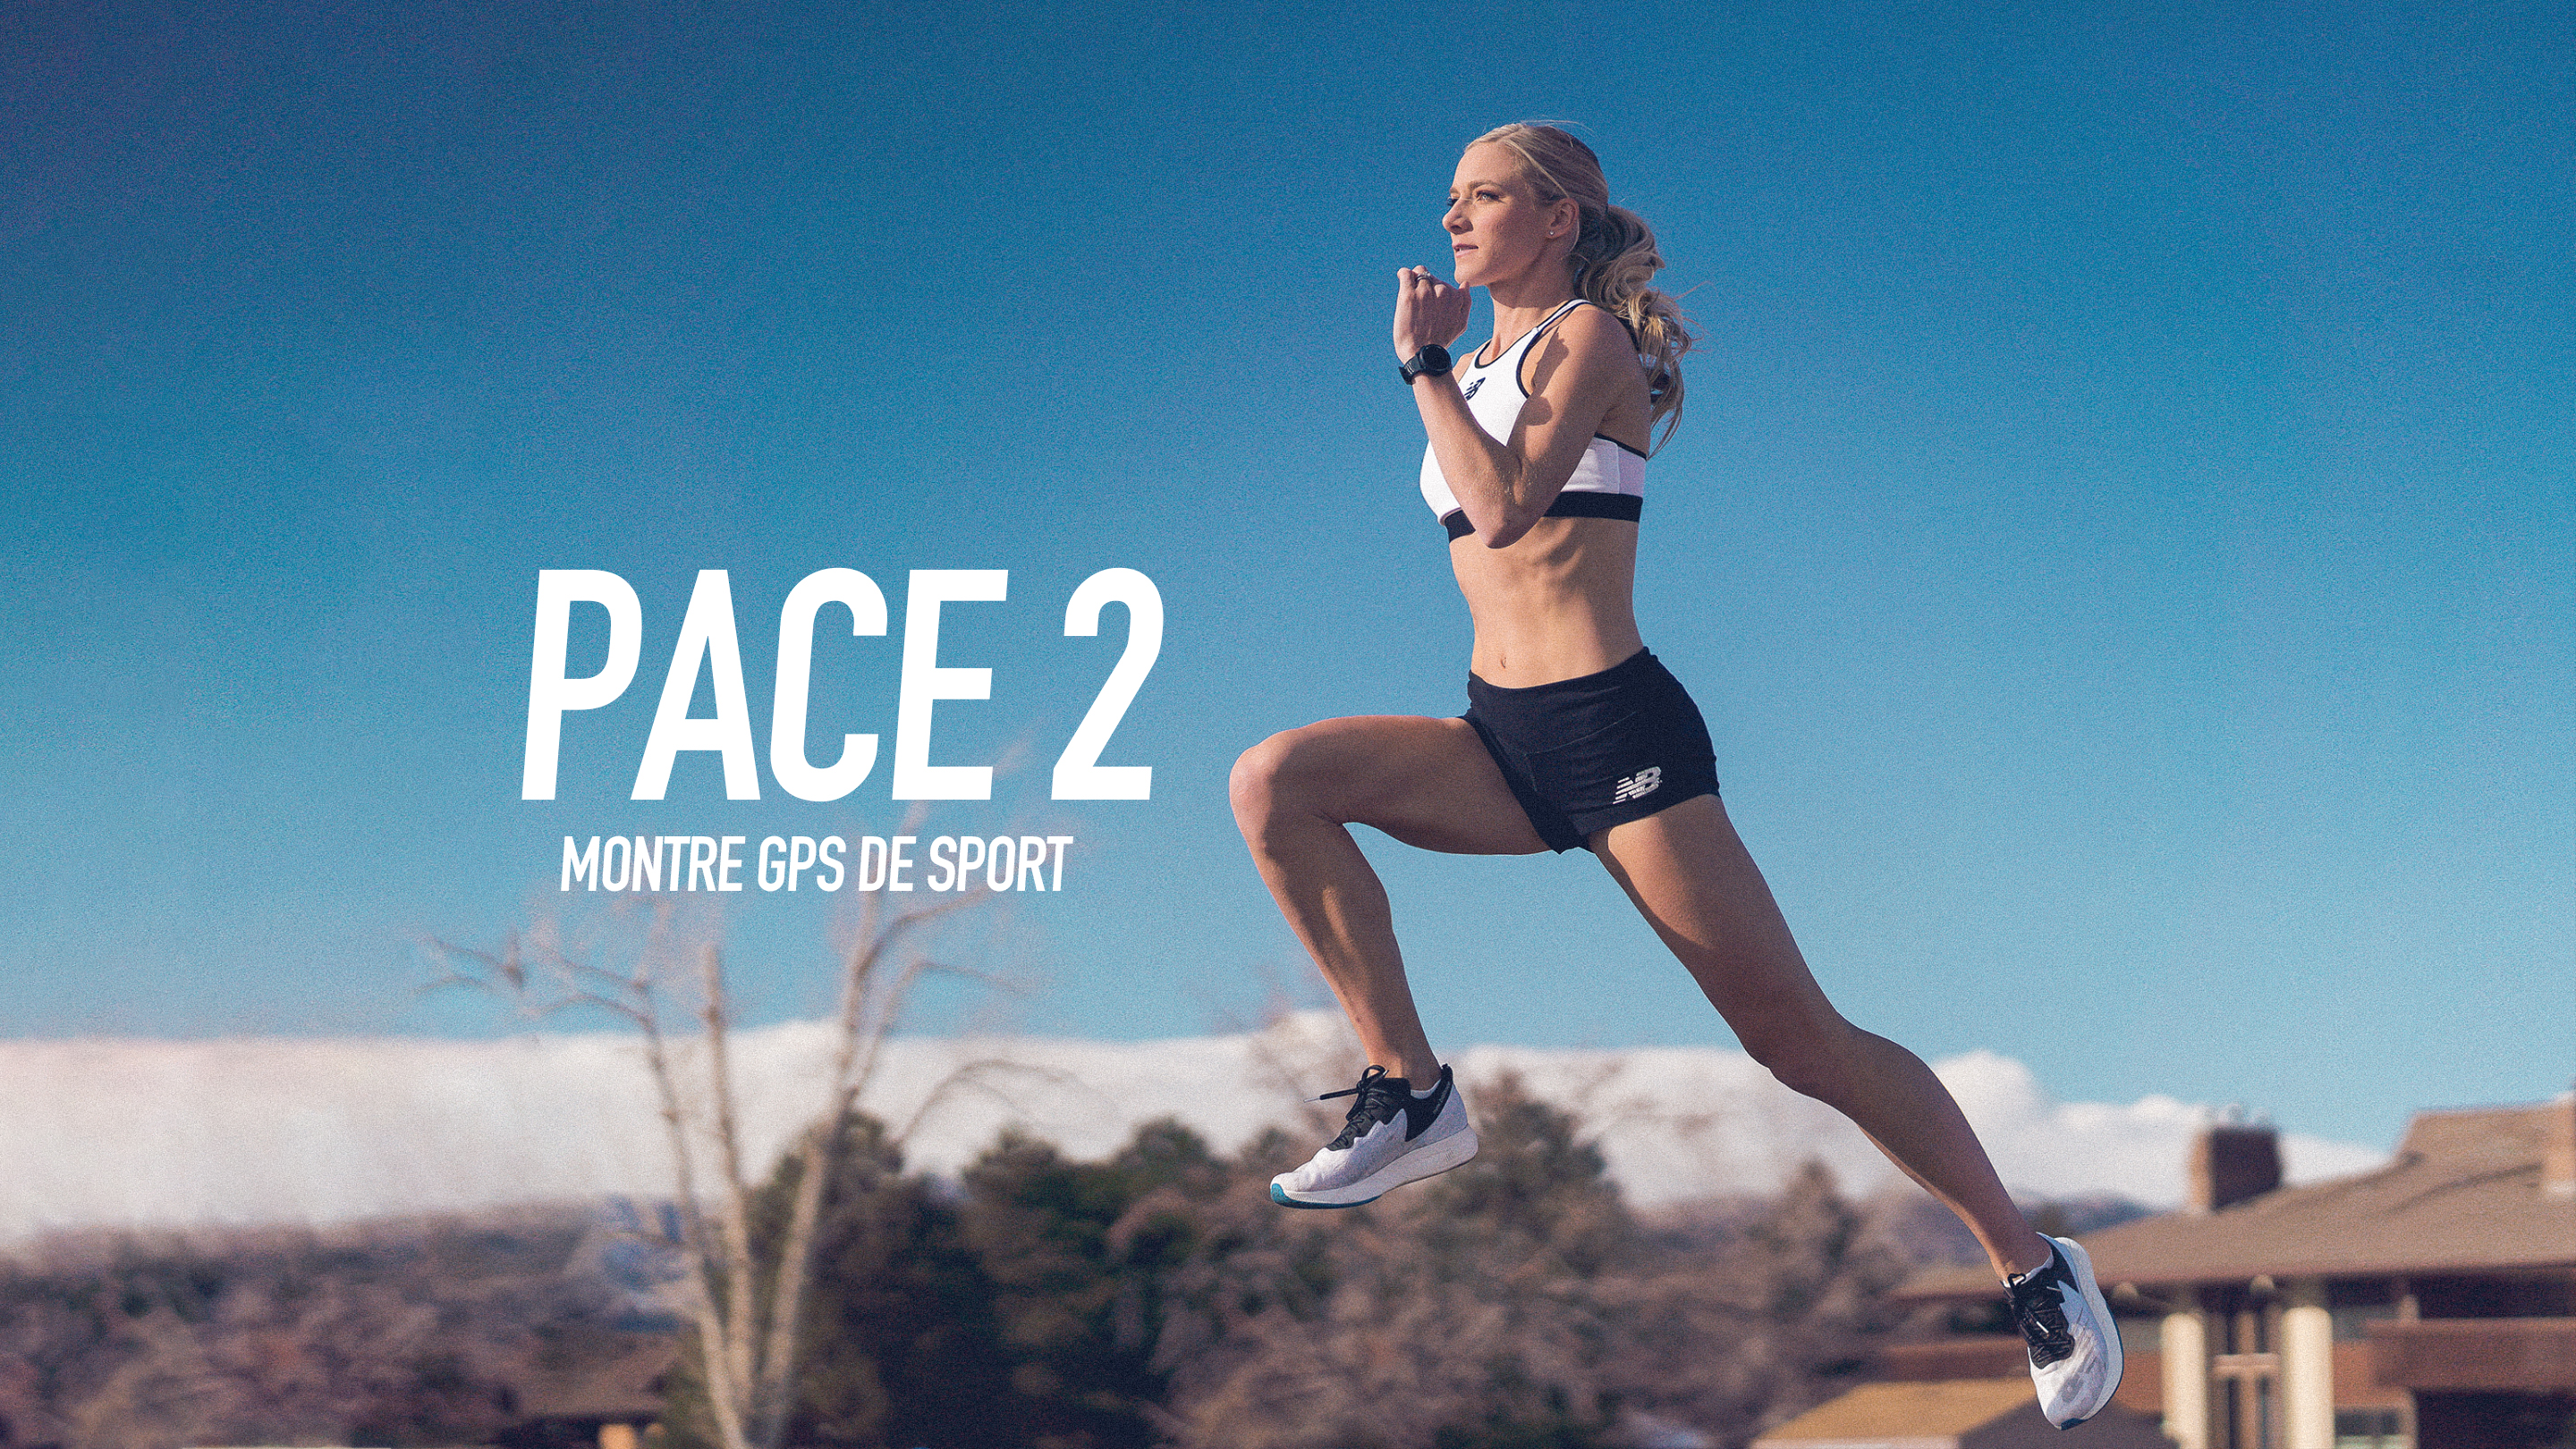 Image of a runner with PACE 2